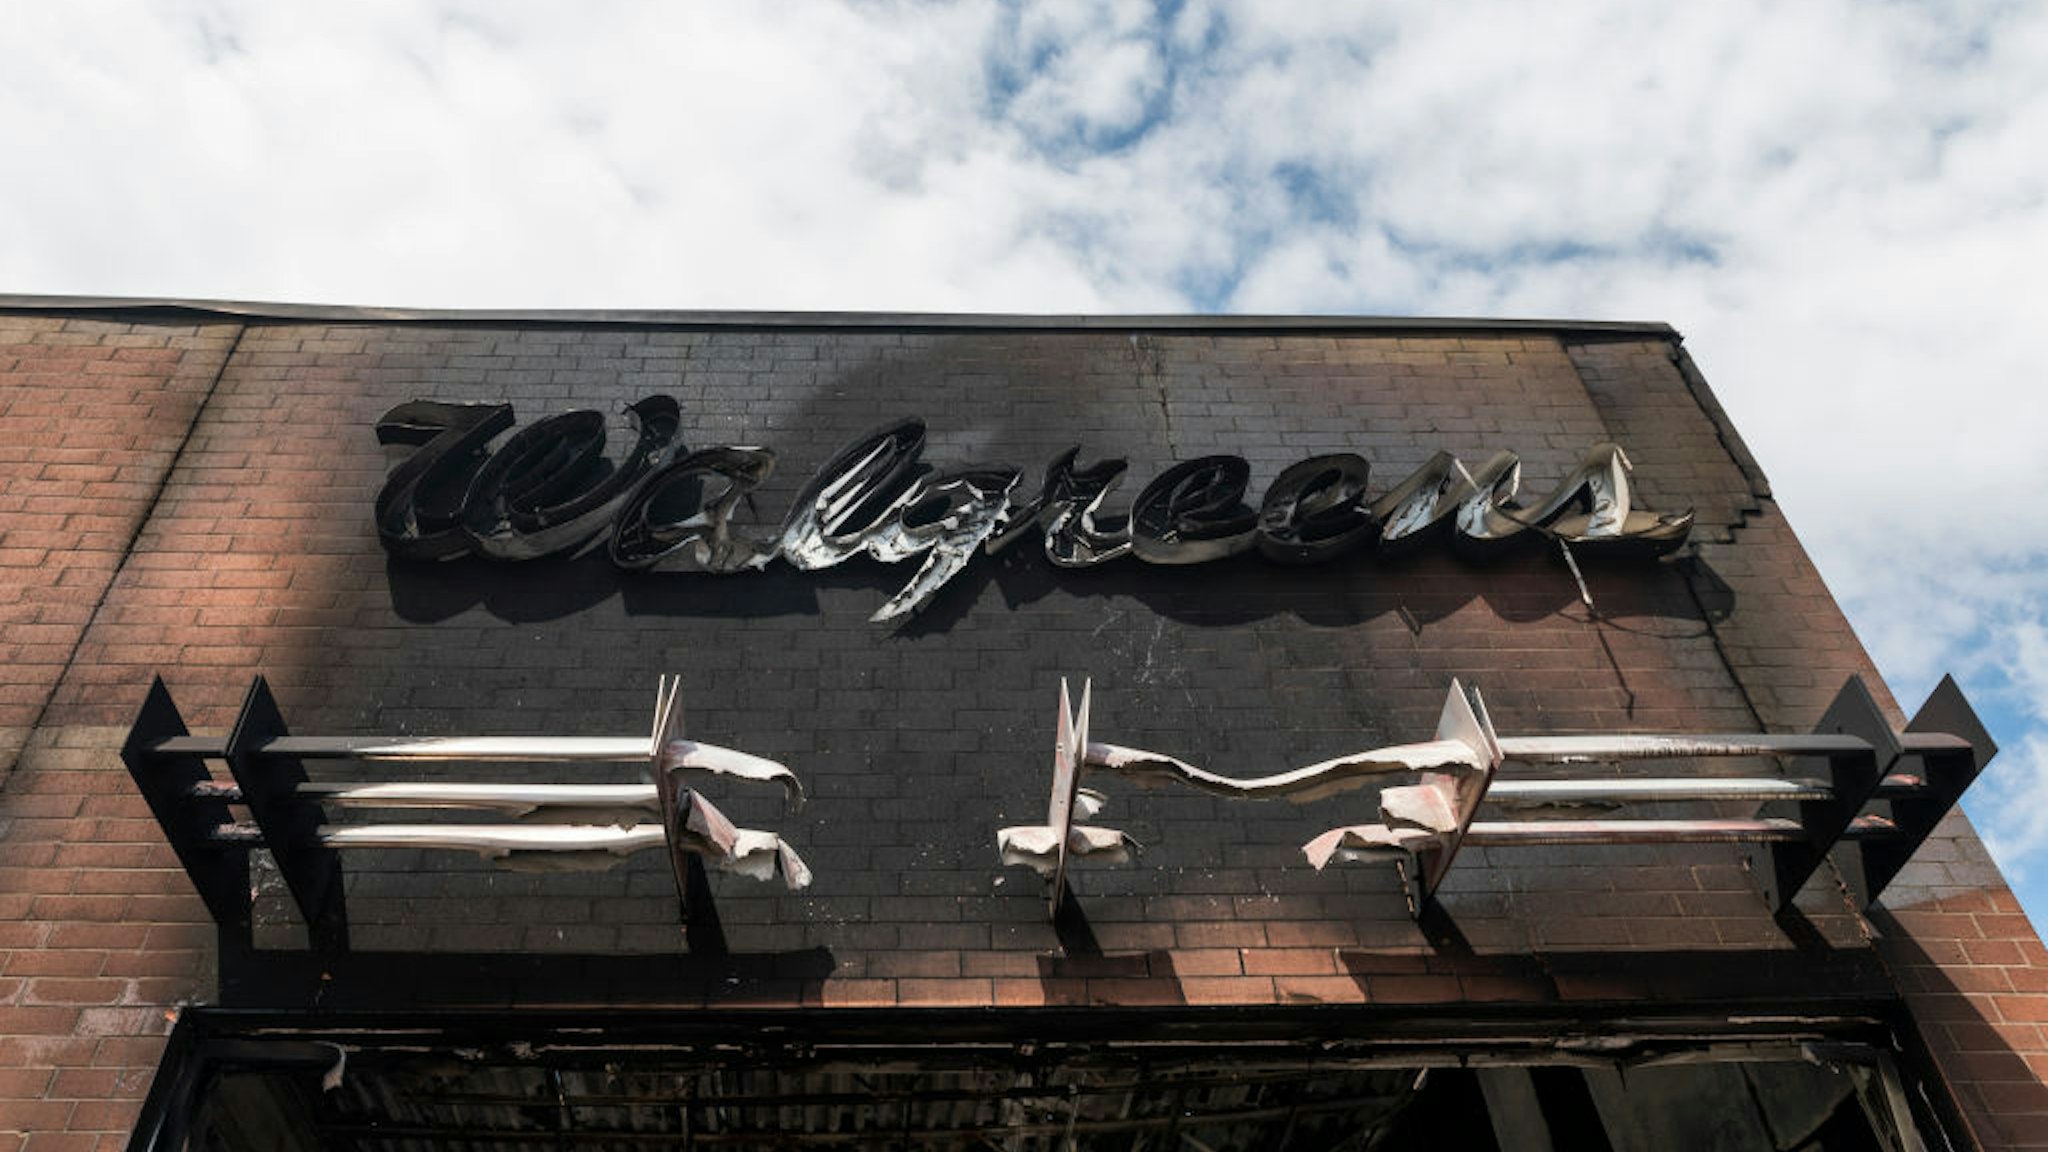 A view outside a burned Walgreens store on May 30, 2020 in Minneapolis, Minnesota. Buildings and businesses around the Twin Cities have been looted and destroyed in the fallout after the death of George Floyd while in police custody.